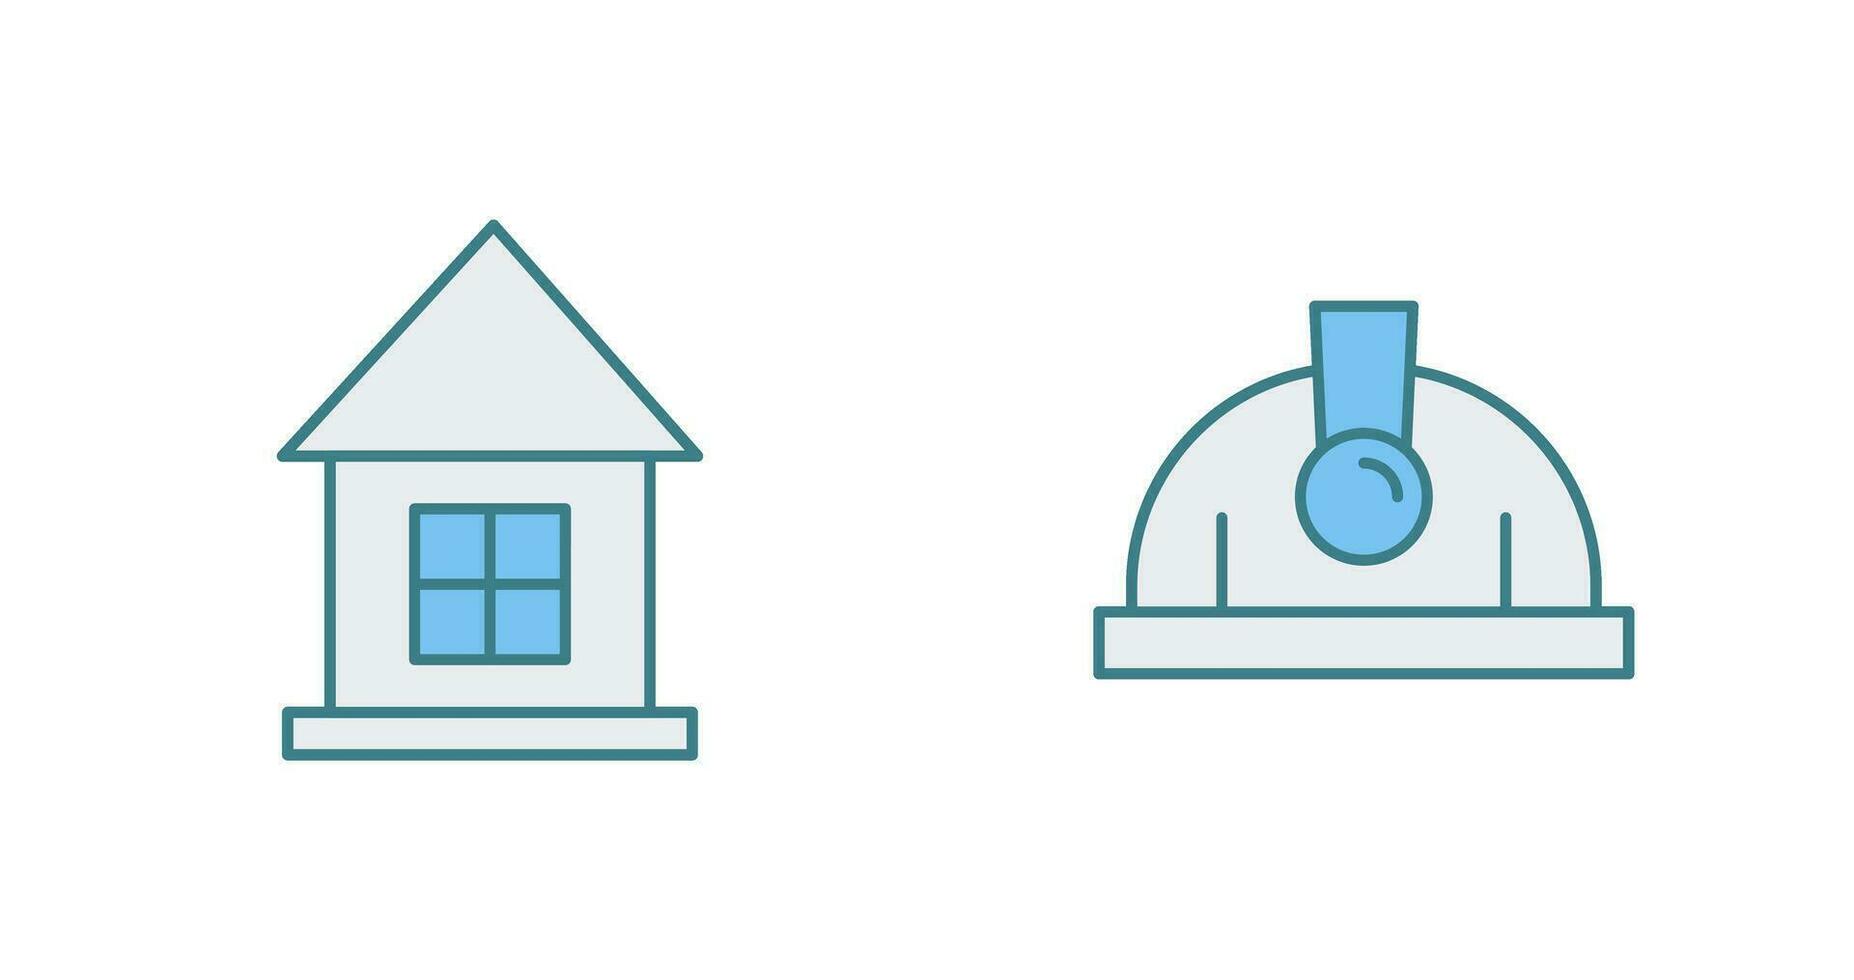 House and Helmet Icon vector